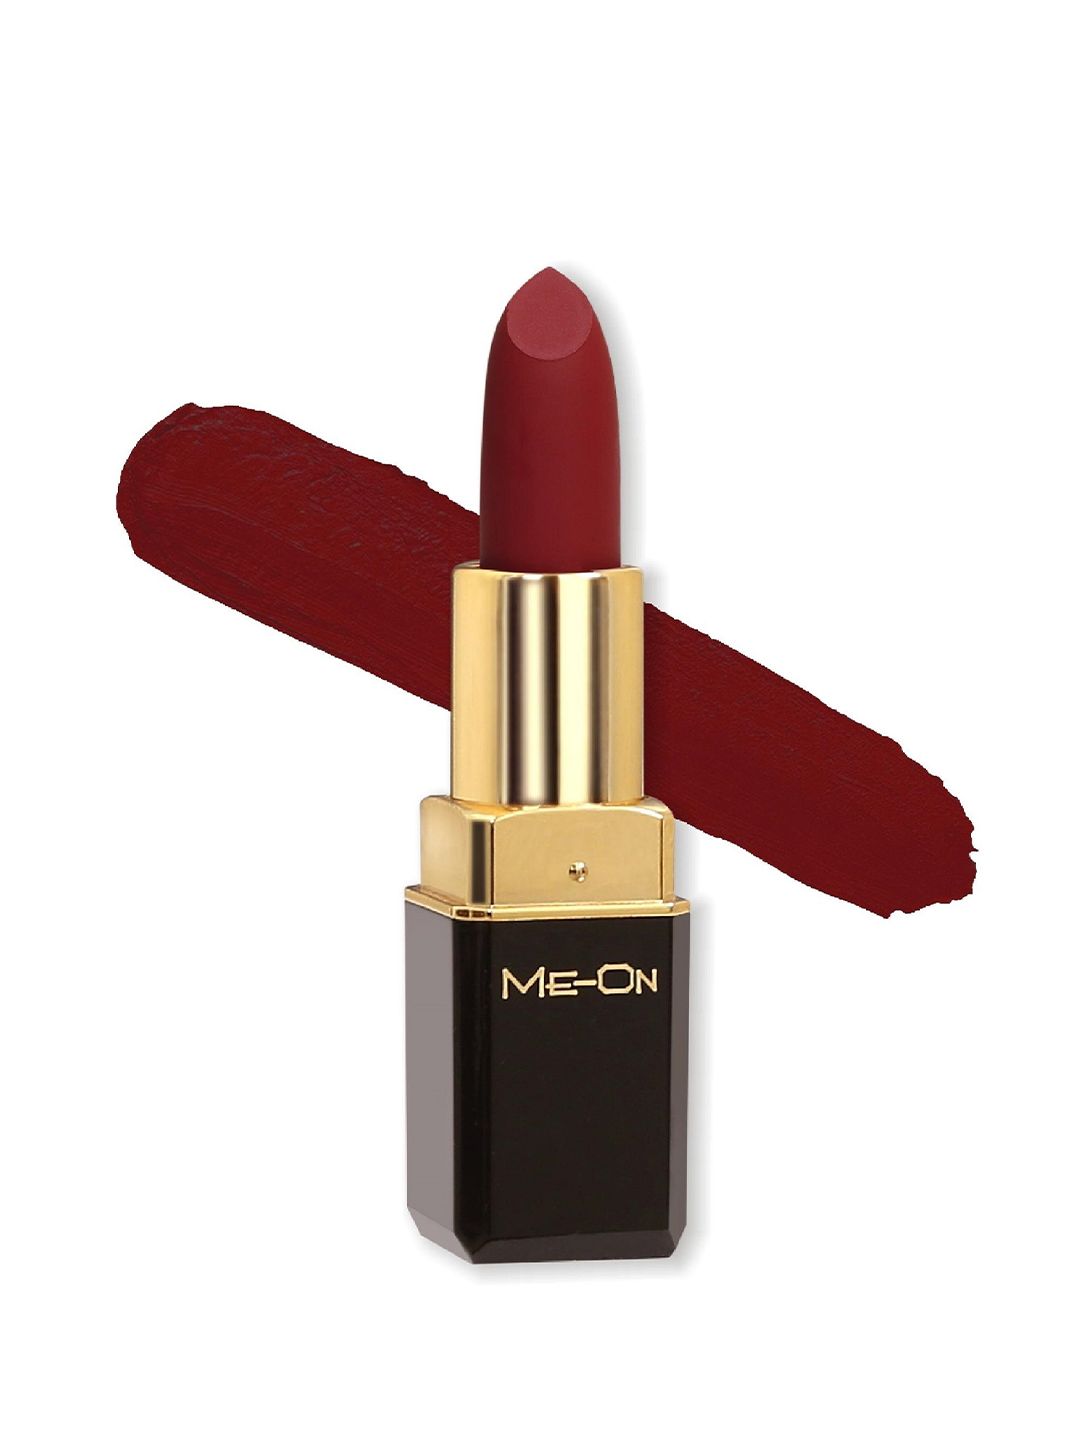 ME-ON Color Addict HD Matte Lipstick - Ruby Woo 04 Price in India